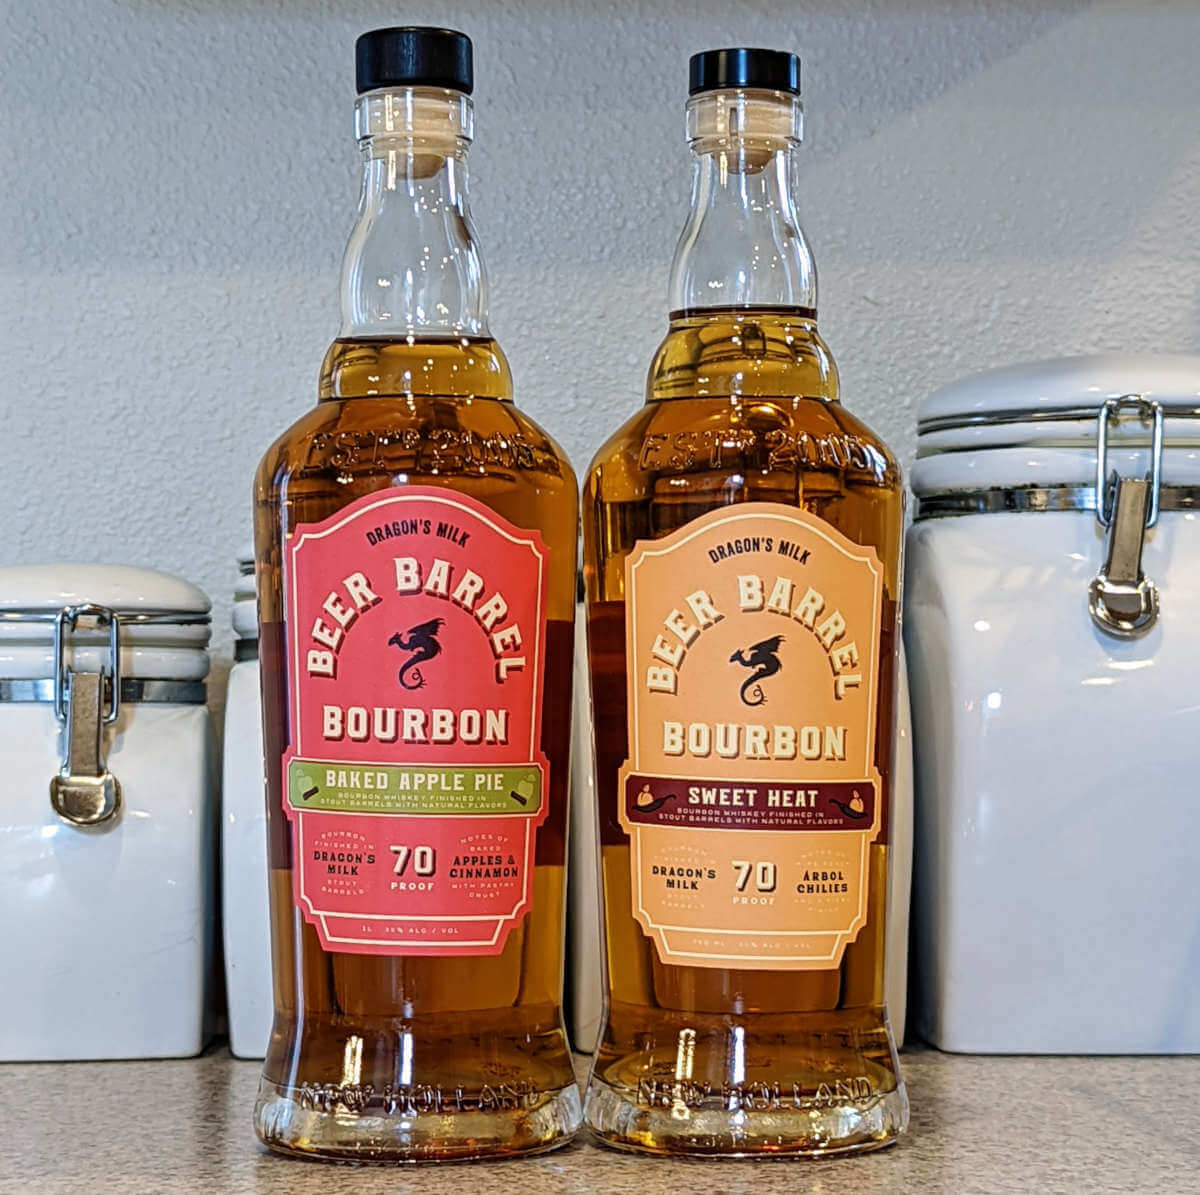 Bourbon reviews: New Holland Baked Apple Pie and Sweet Heat Beer Barrel Bourbons